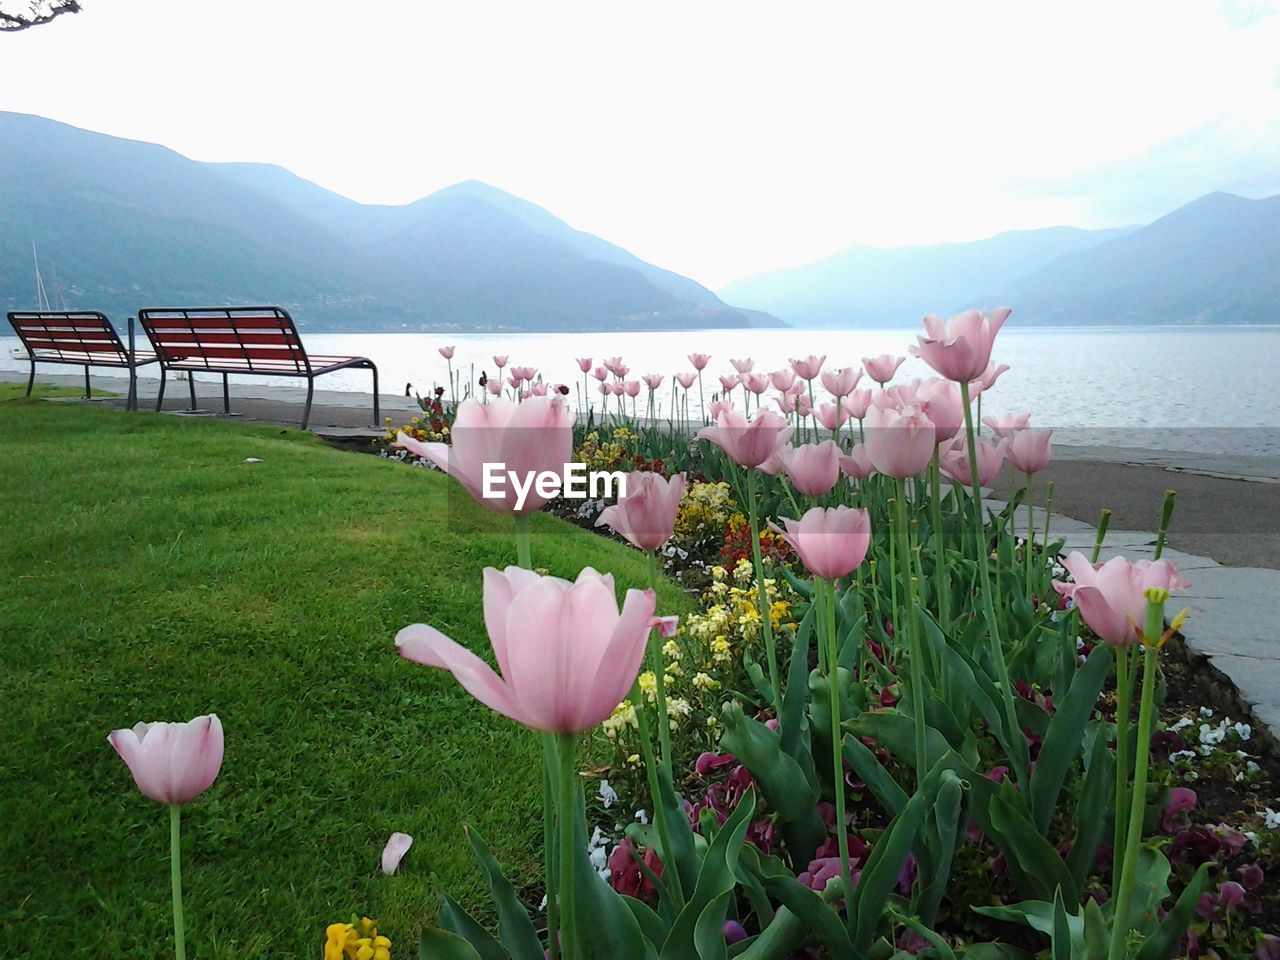 PINK FLOWERS BY LAKE AGAINST MOUNTAIN